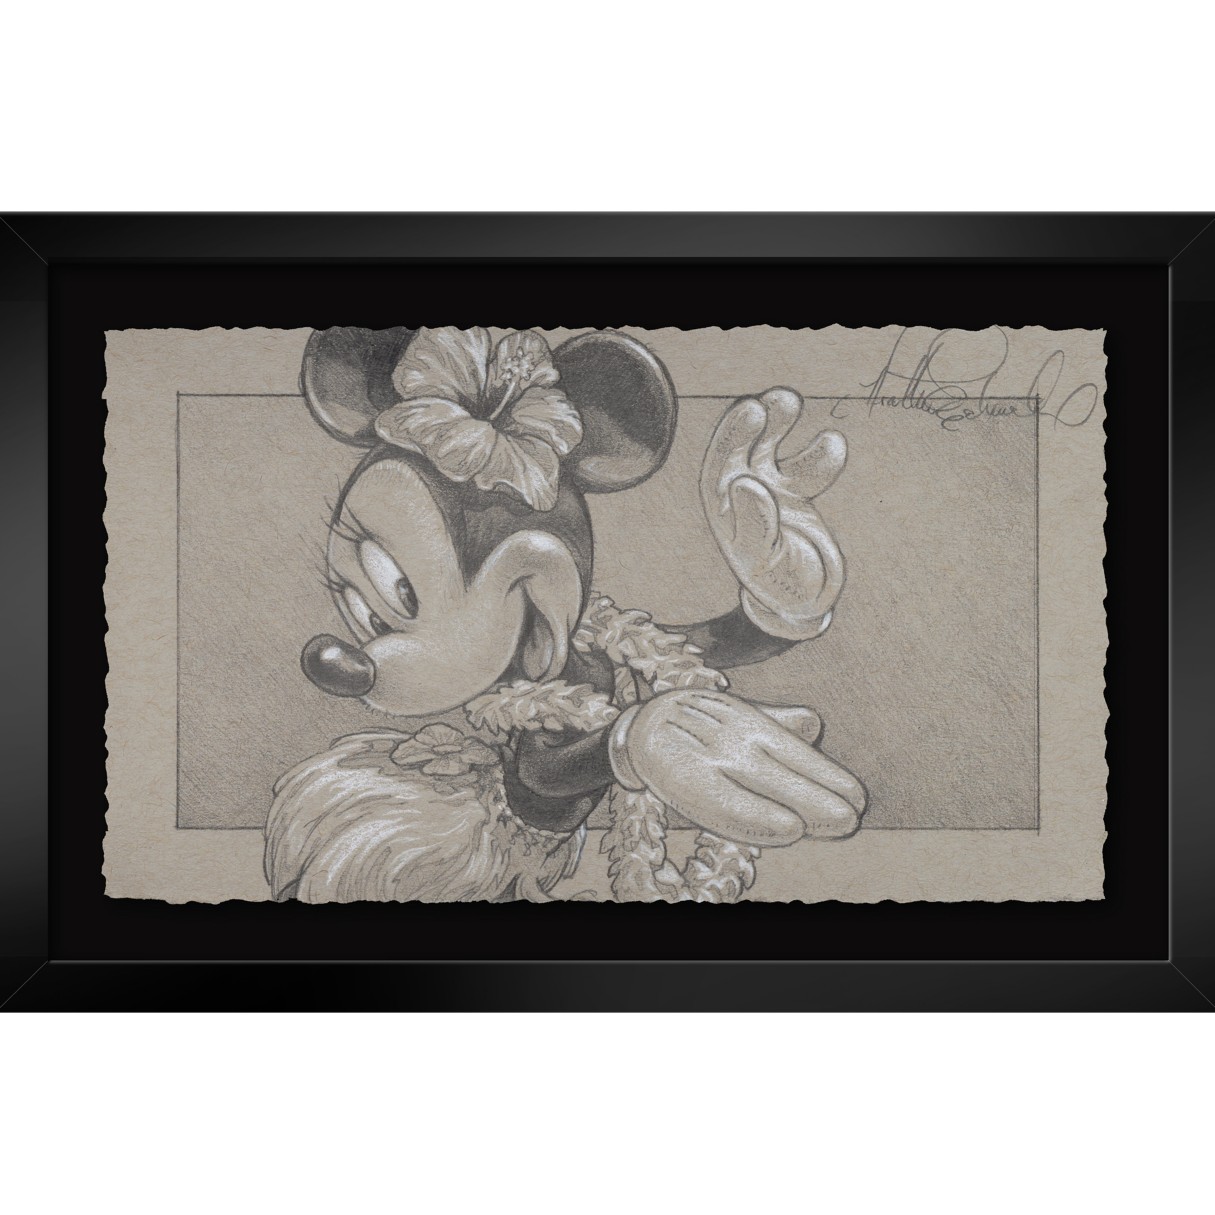 Minnie Mouse ''When I'm Ready'' Print by Heather Edwards – Limited Edition